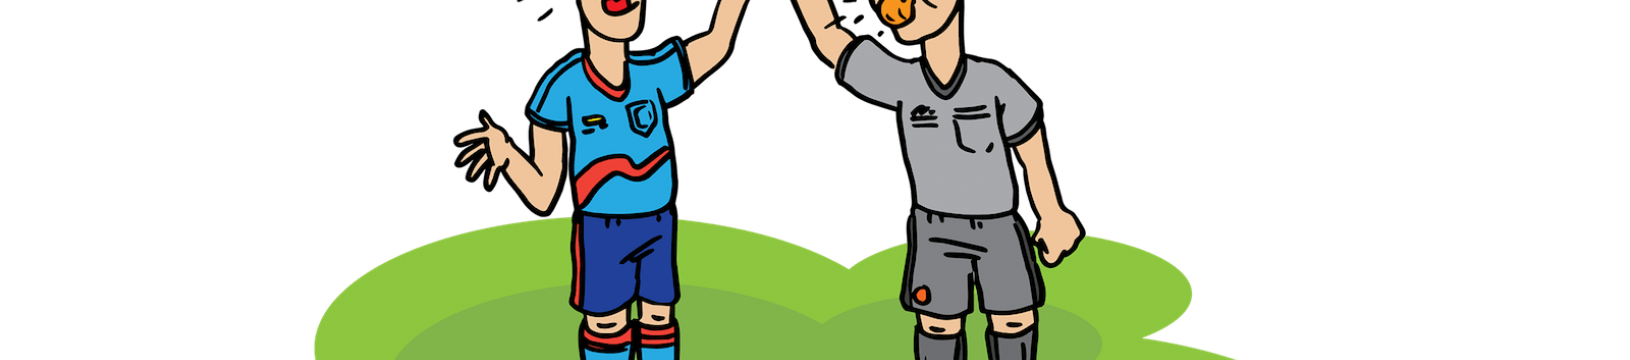 Cartoon of a referee showing a red card